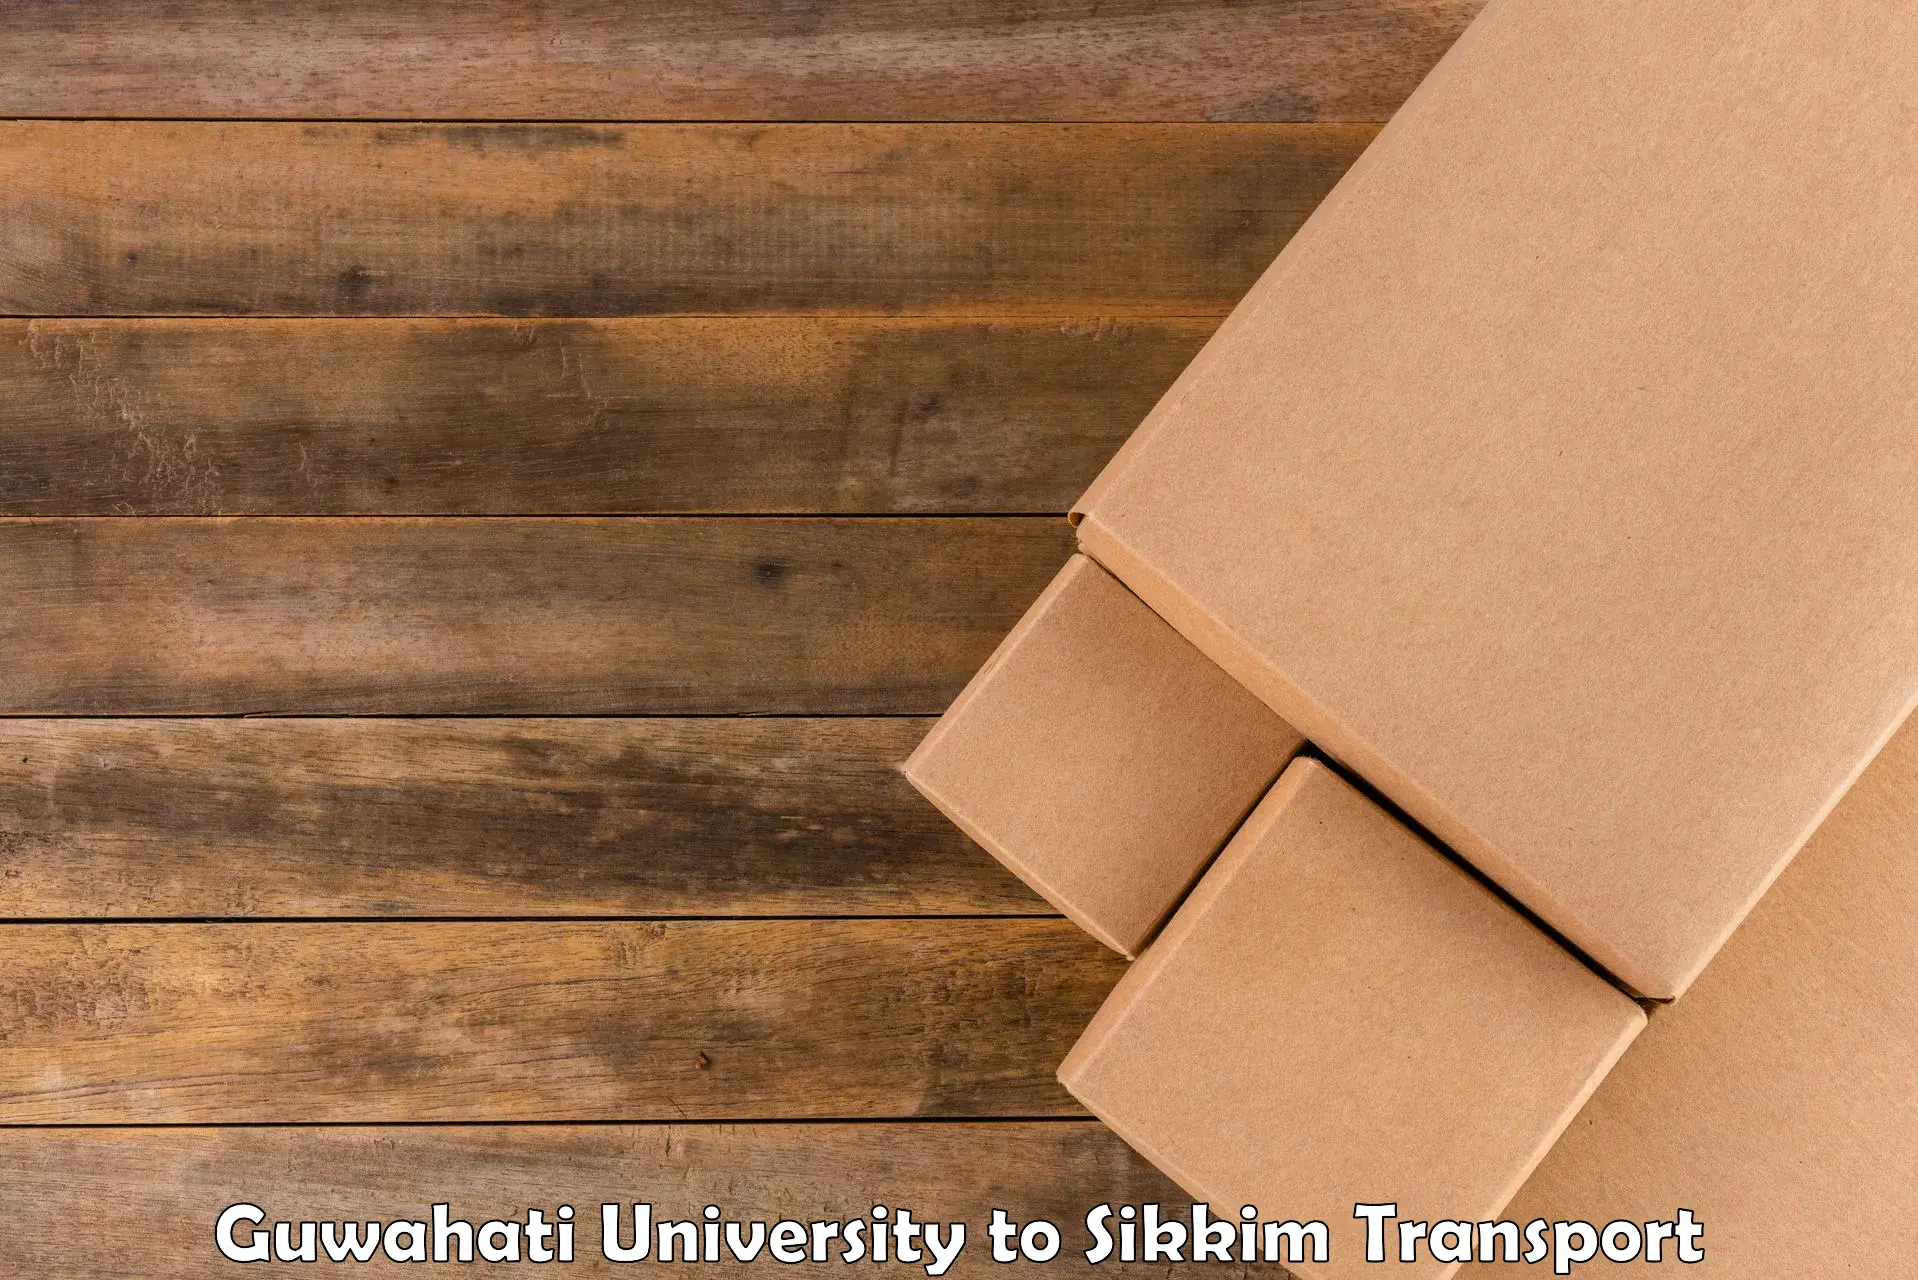 Package delivery services in Guwahati University to Pelling